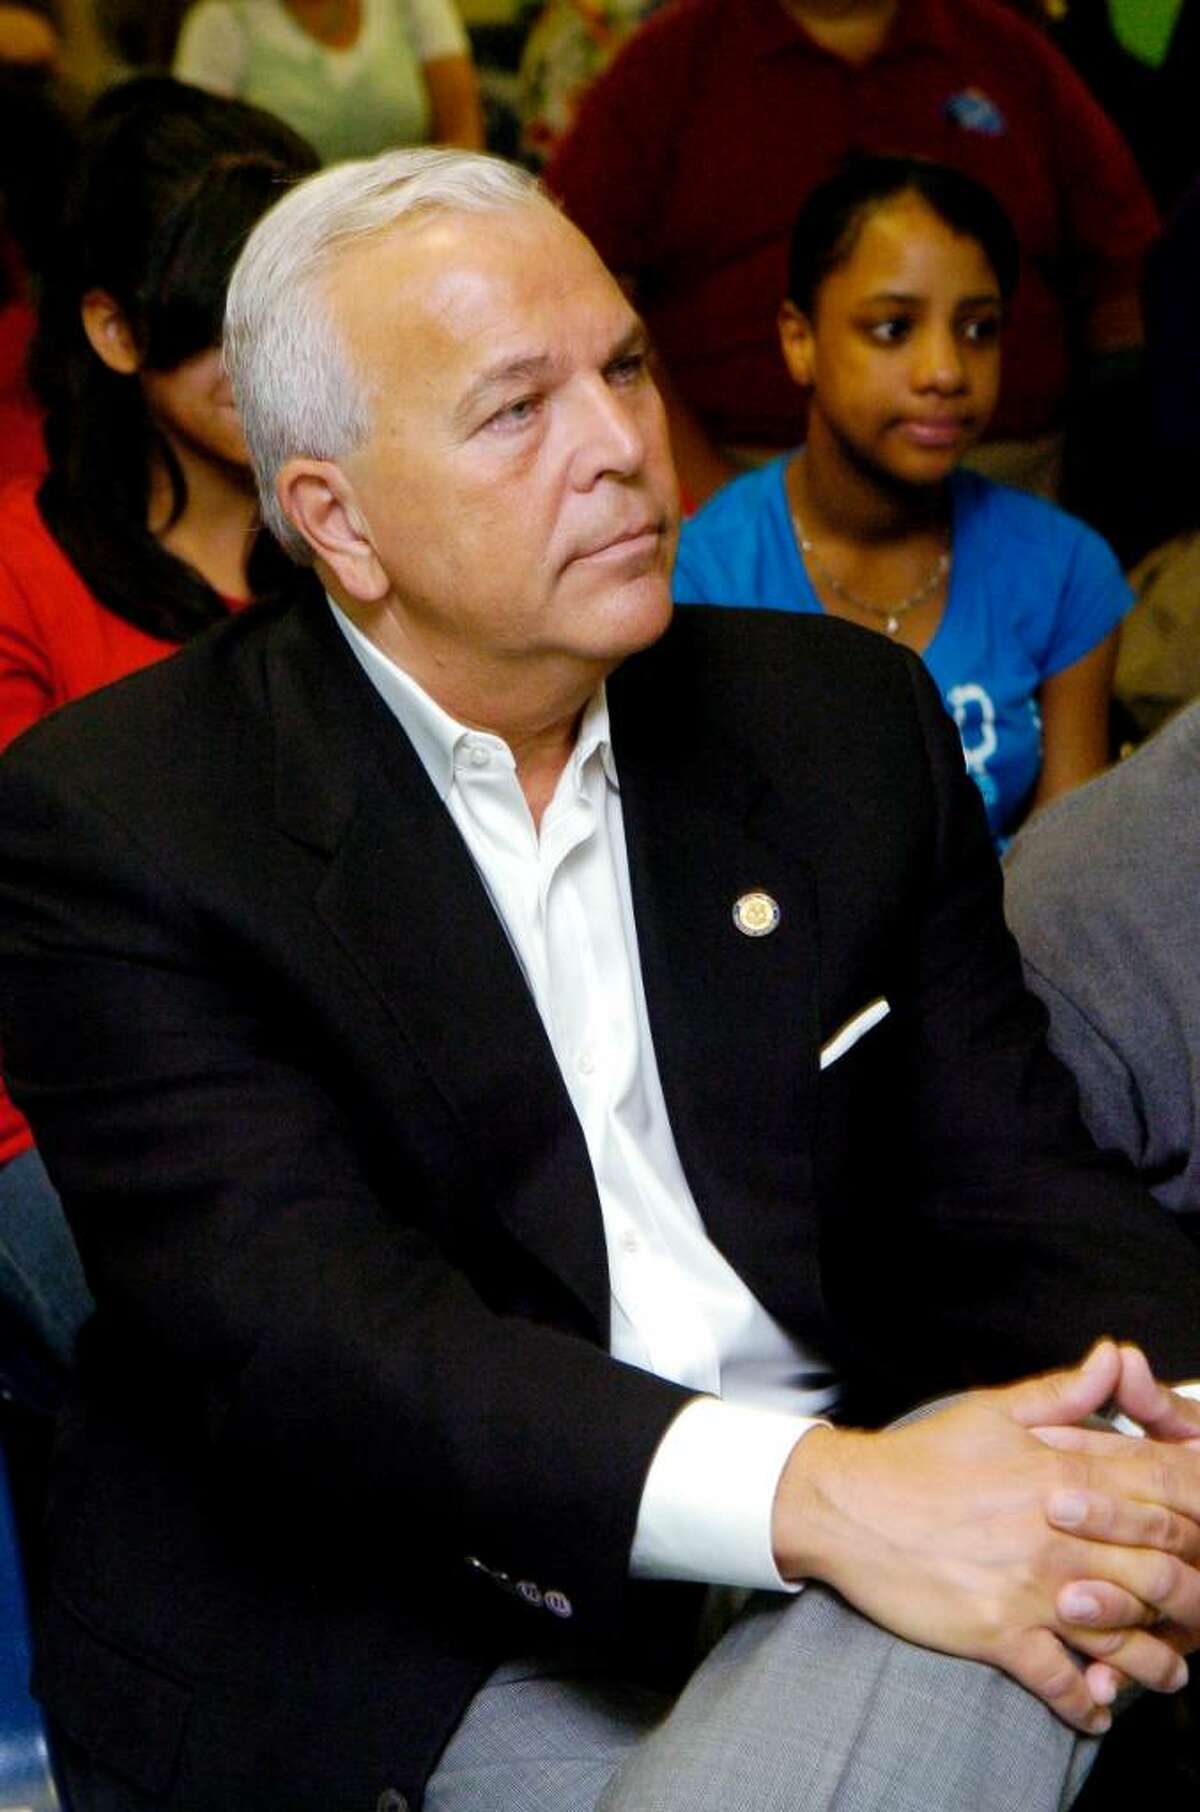 Lt Governor Michael Fedele listens to the fifth graders in IXCEL Summer Camp gubernatorial debate at the Yerwood Center in Stamford, Conn. on Monday August 2, 2010.